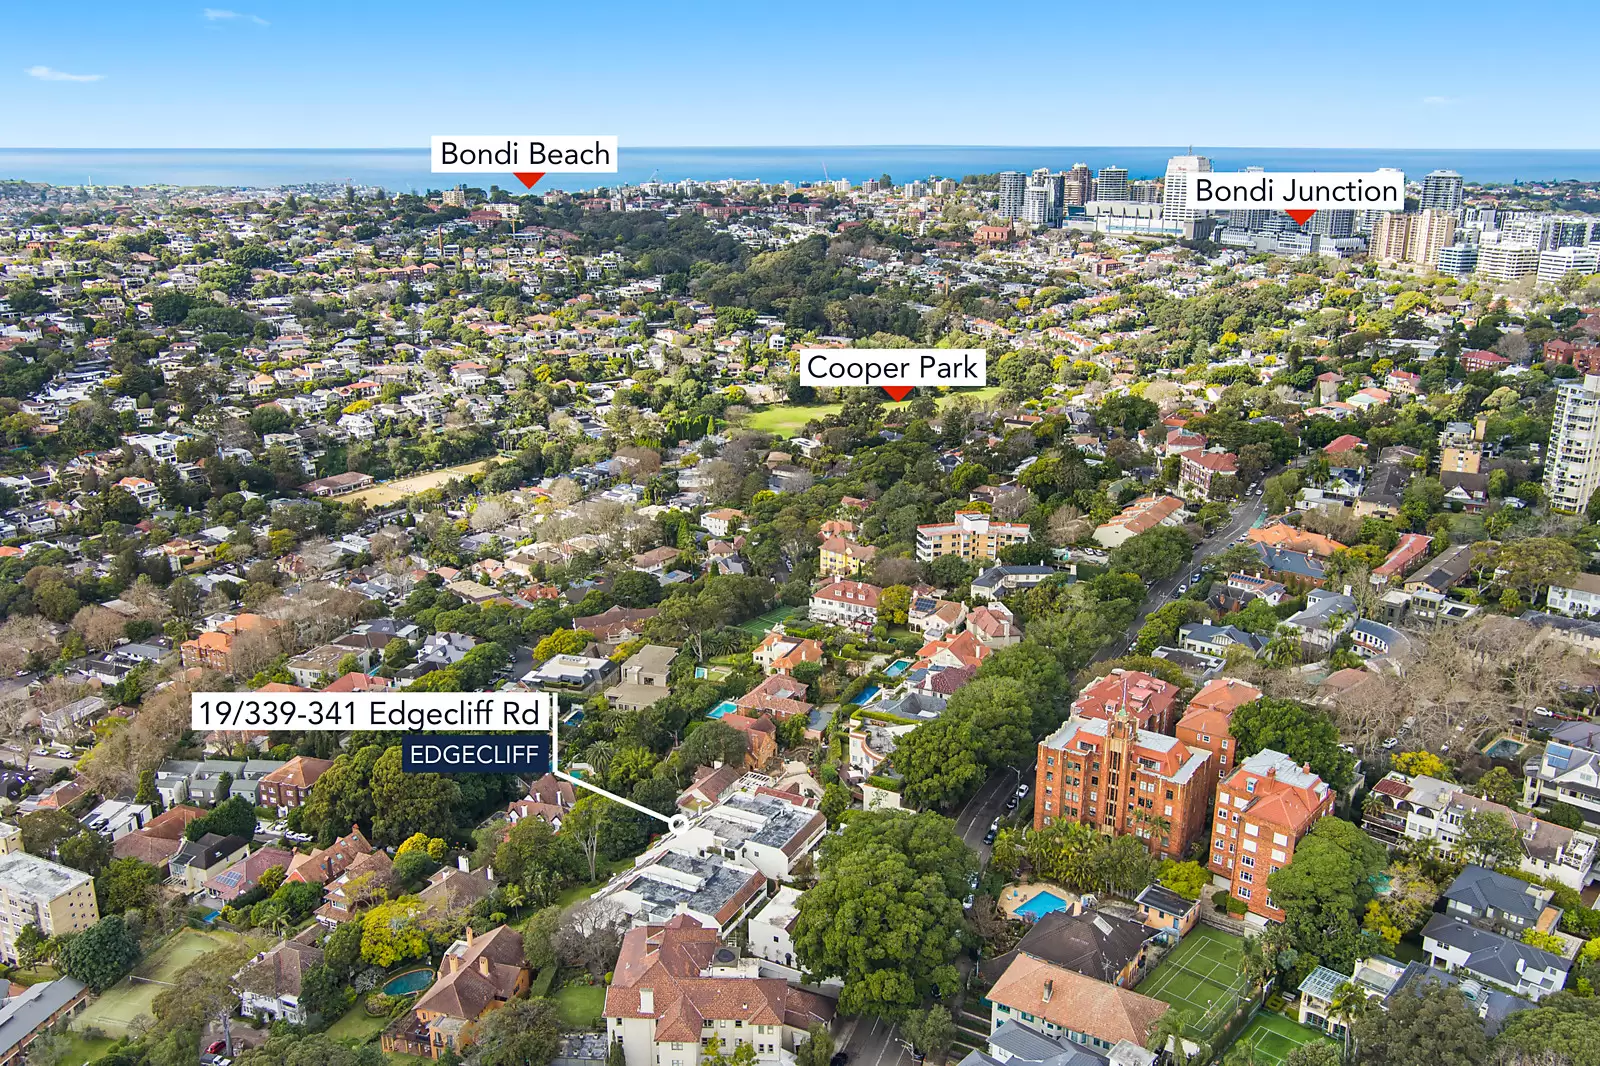 Photo #22: 19/339-341 Edgecliff Road, Edgecliff - Sold by Sydney Sotheby's International Realty